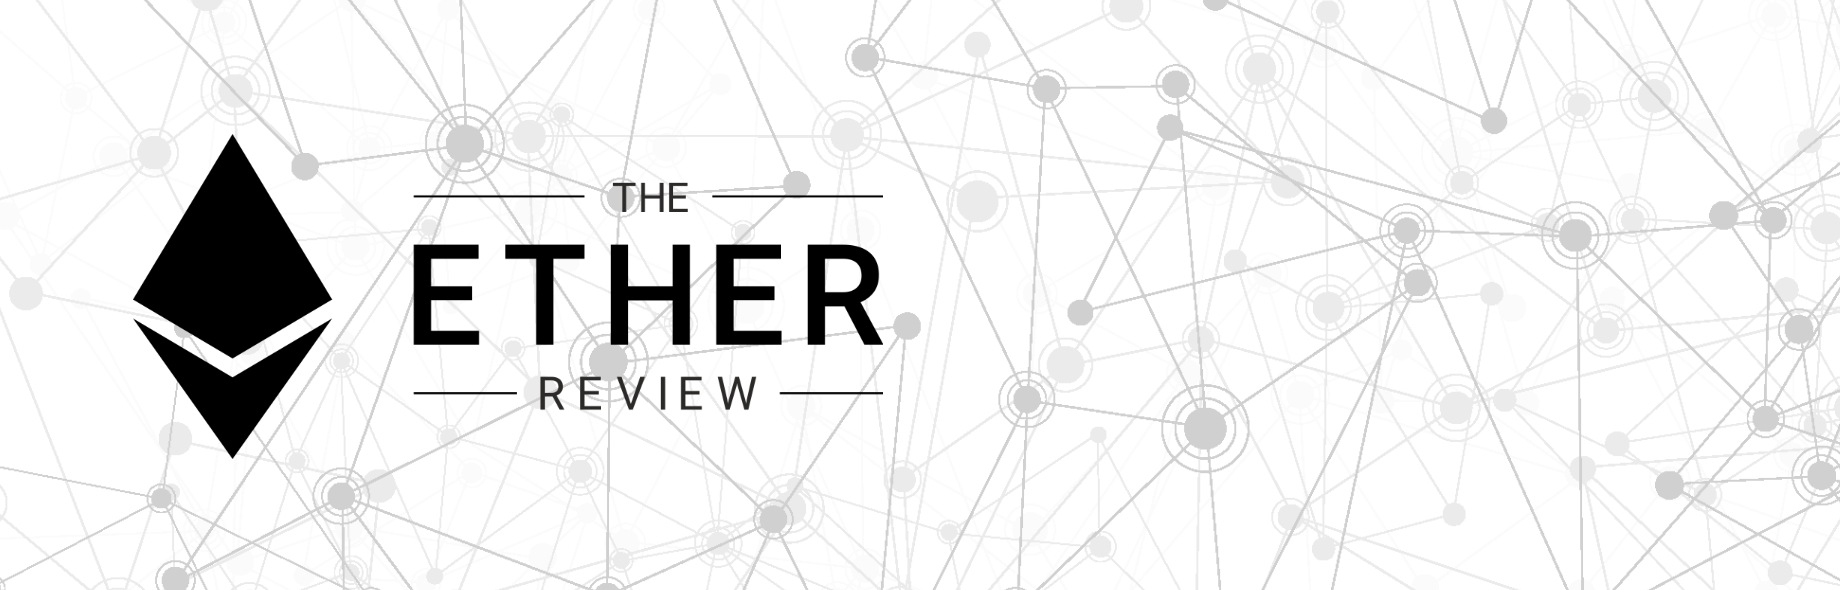 The Ether Review